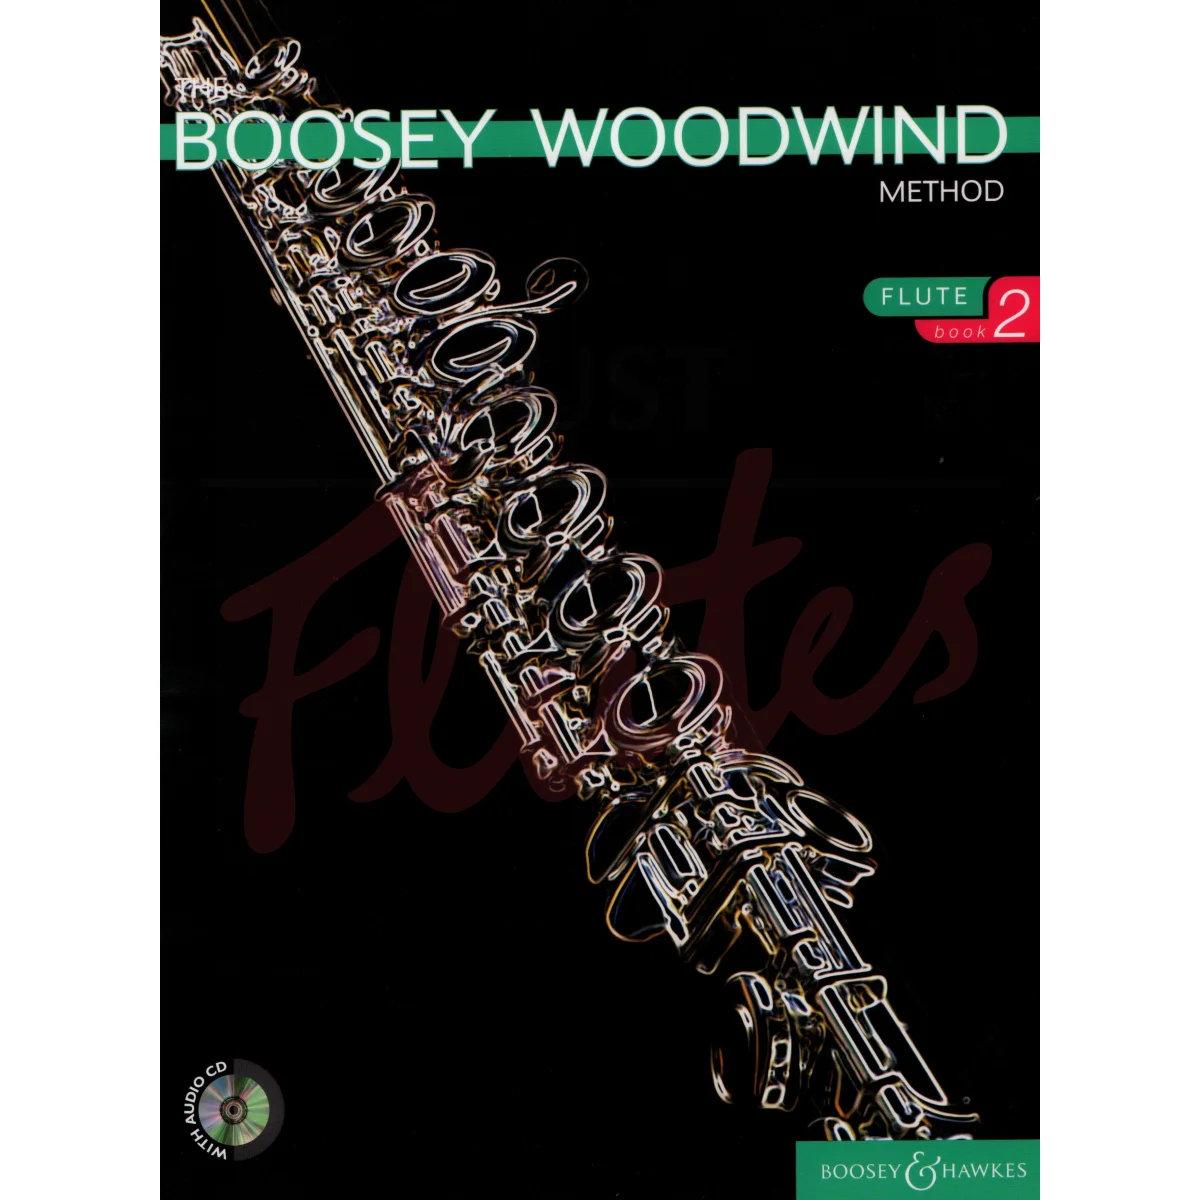 The Boosey Woodwind Method for Flute, Book 2